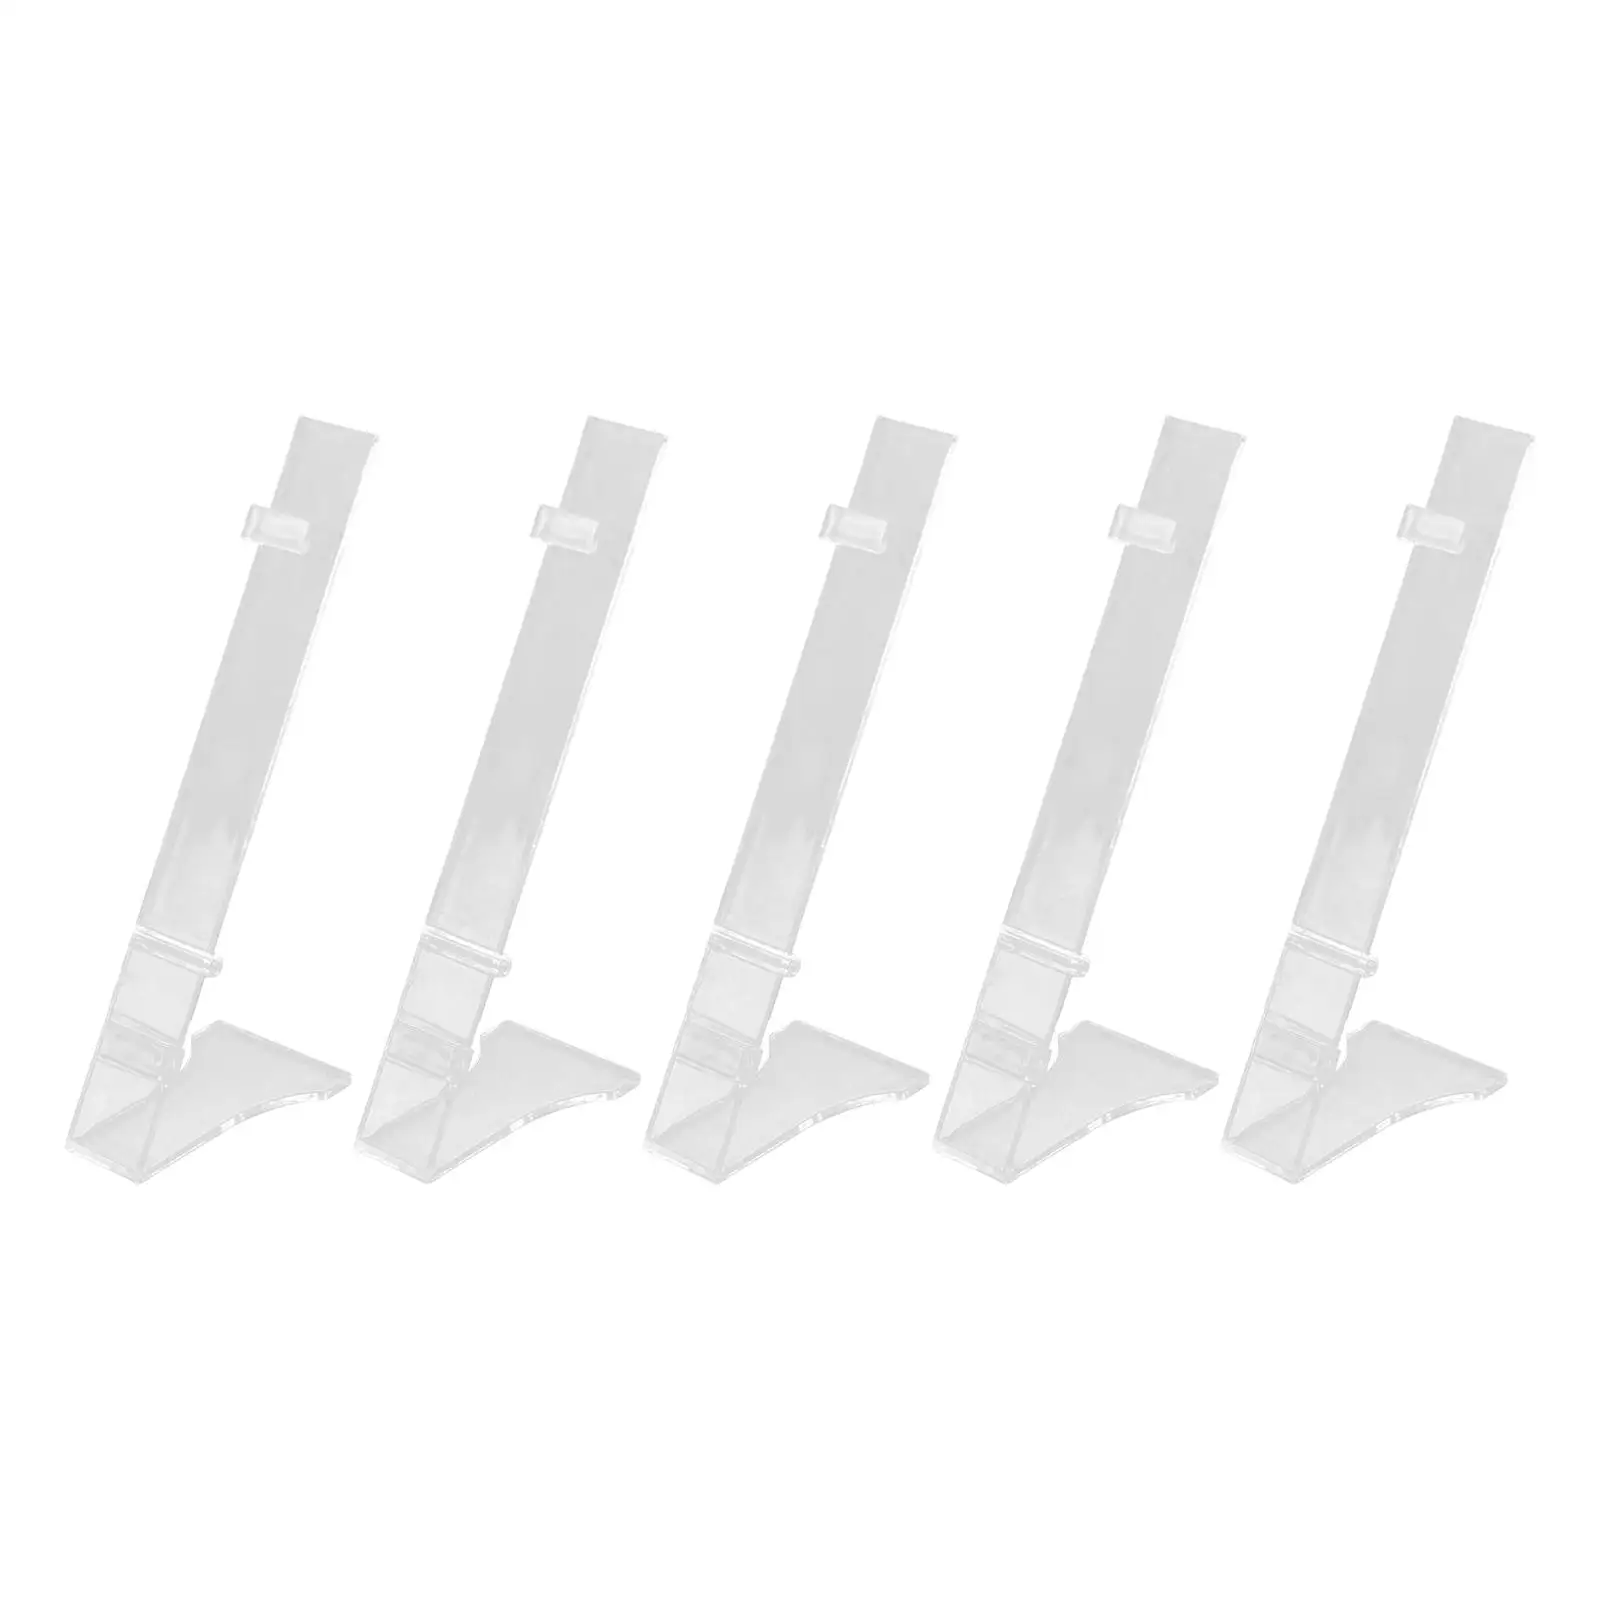 5Pcs Clear Watch Display Stand for Home or Store Usage Showcase Watch Stand